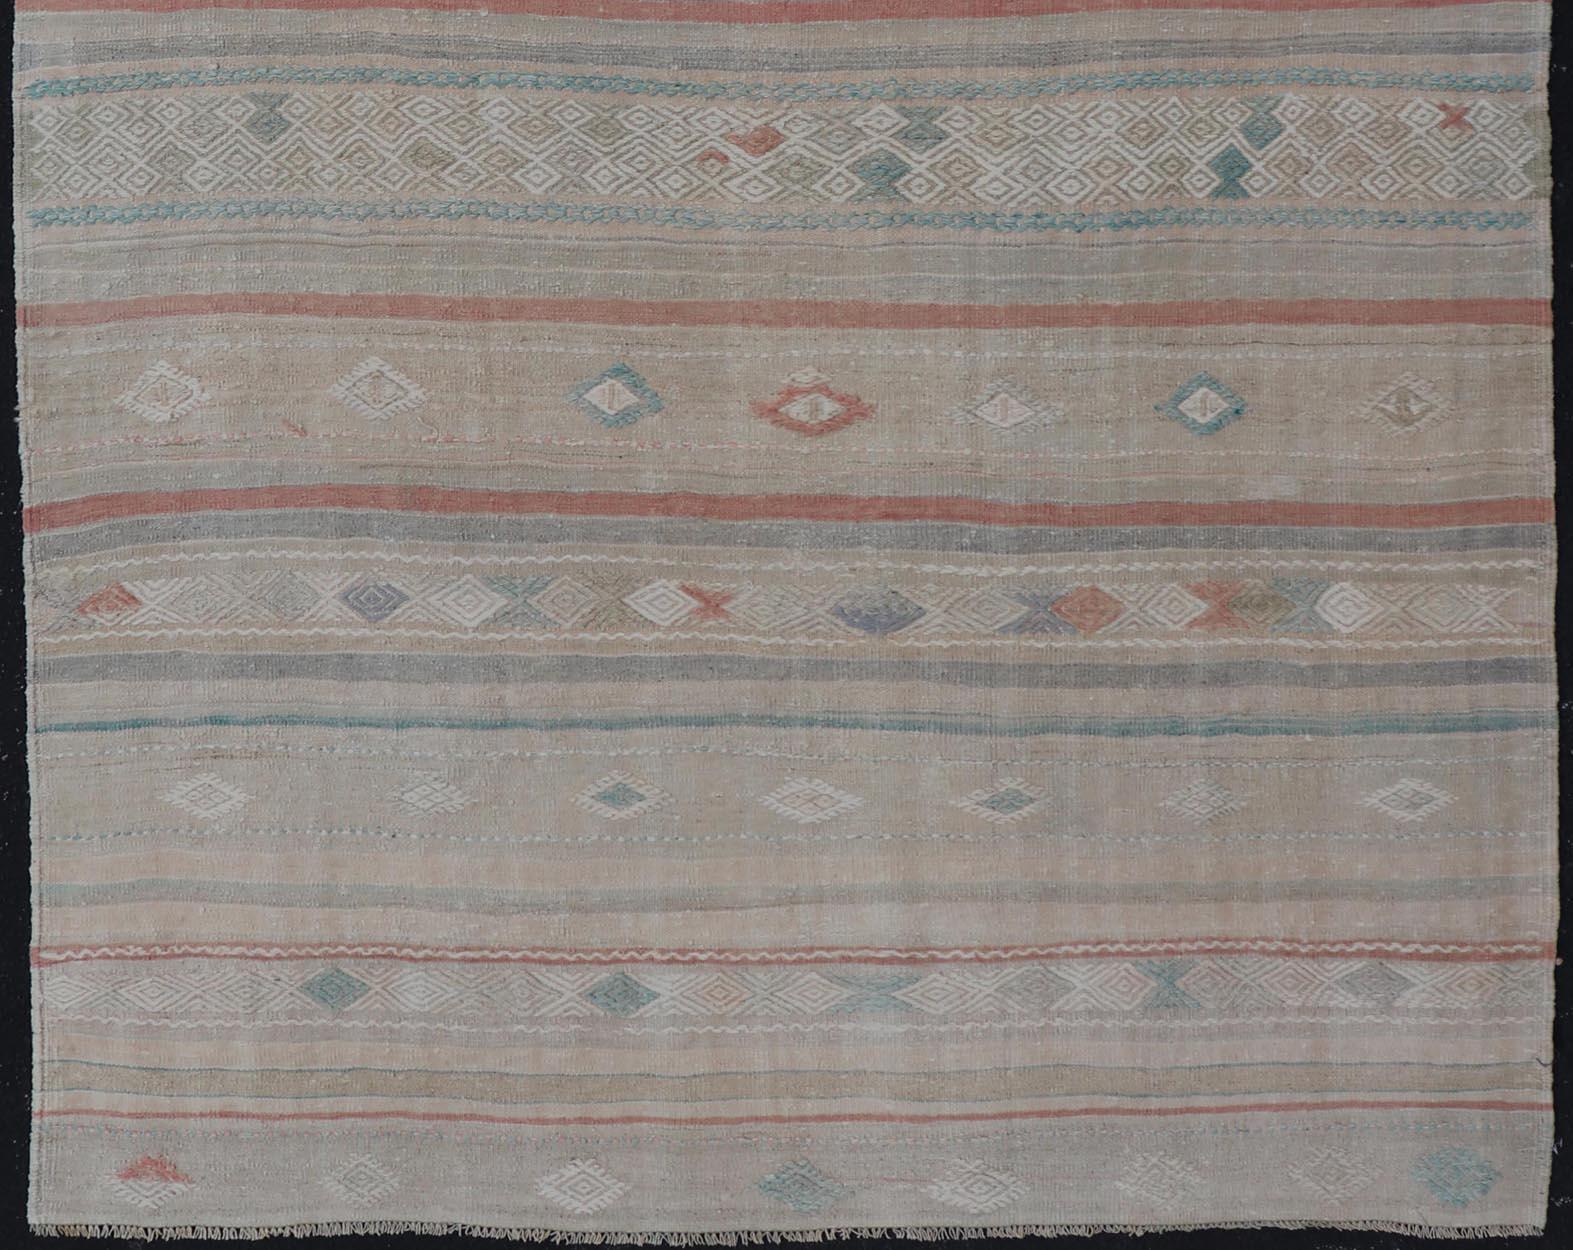 Vintage flat-weave Kilim with embroideries with a modern design in tan, brown, green and cream. geometric stripe design Vintage Kilim from Turkey, Keivan Woven Arts / rug EN-13957, country of origin / type: Turkey / Kilim, circa 1950

Measures: